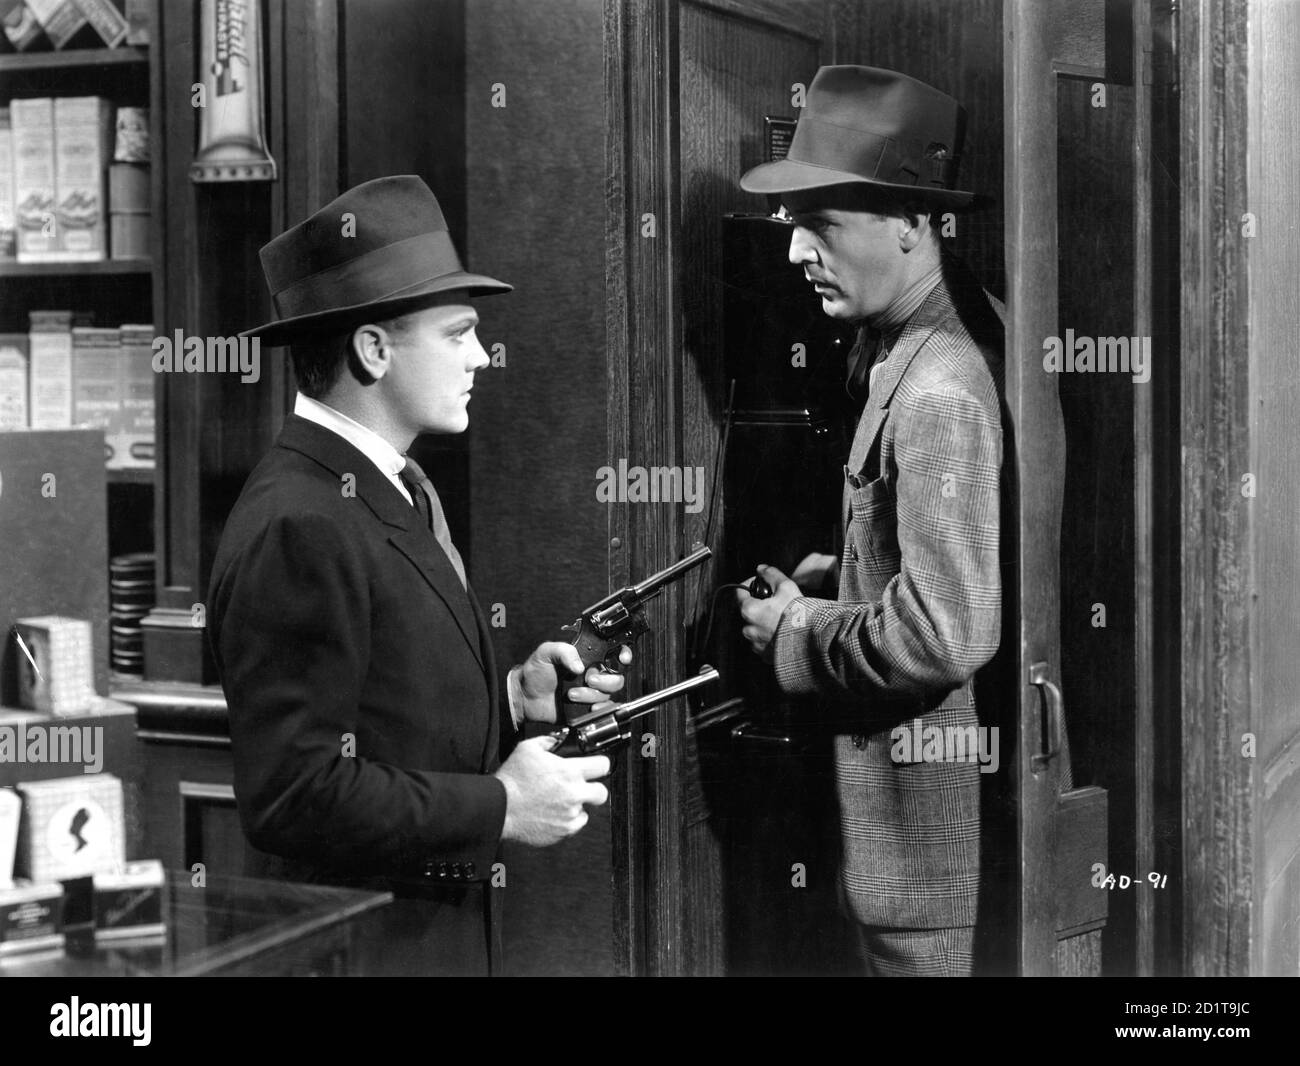 JAMES CAGNEY in ANGELS WITH DIRTY FACES 1938 Regisseur MICHAEL CURTIZ Warner Bros. Stockfoto